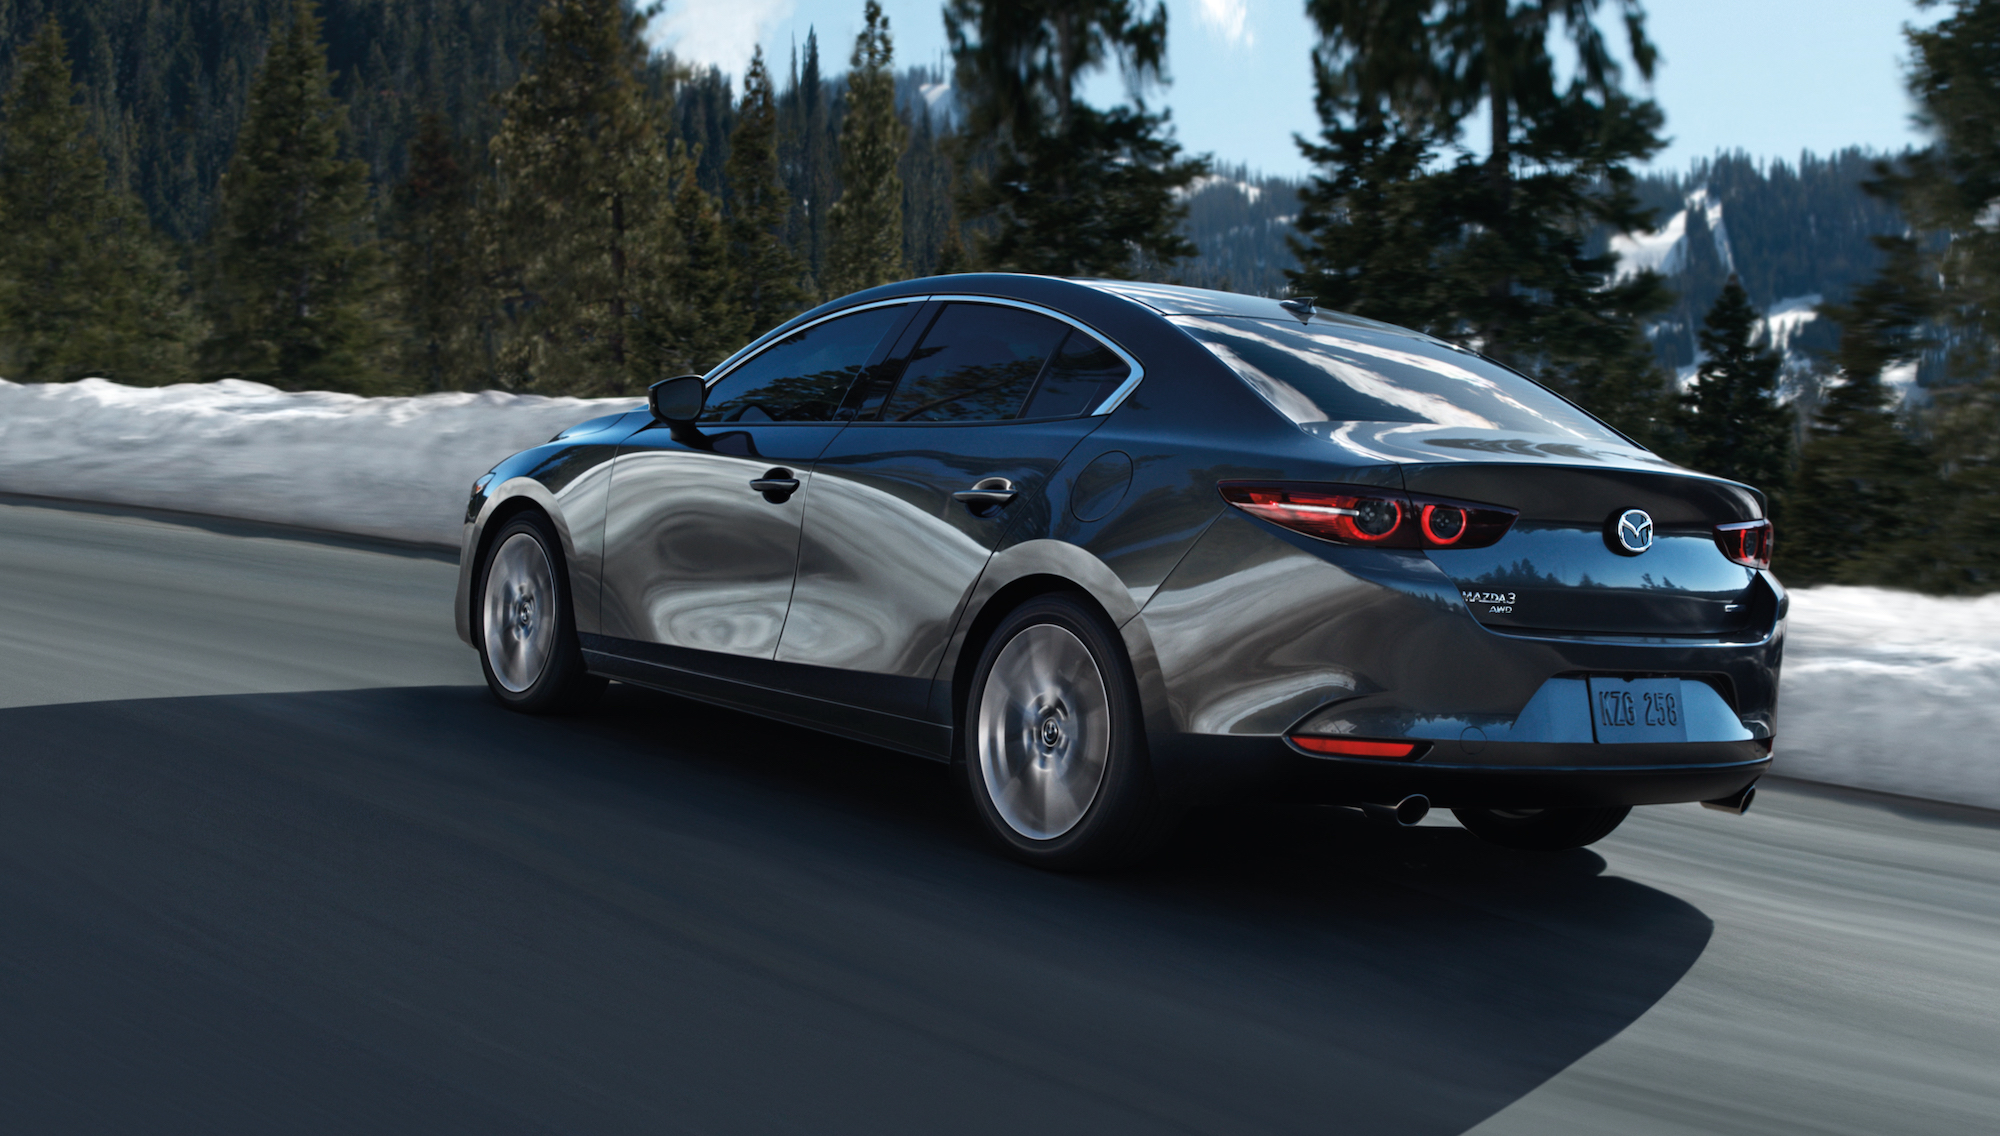 A dark-gray metallic 2020 Mazda3 sedan traveling on a mountain road past snow and pine trees on a sunny day